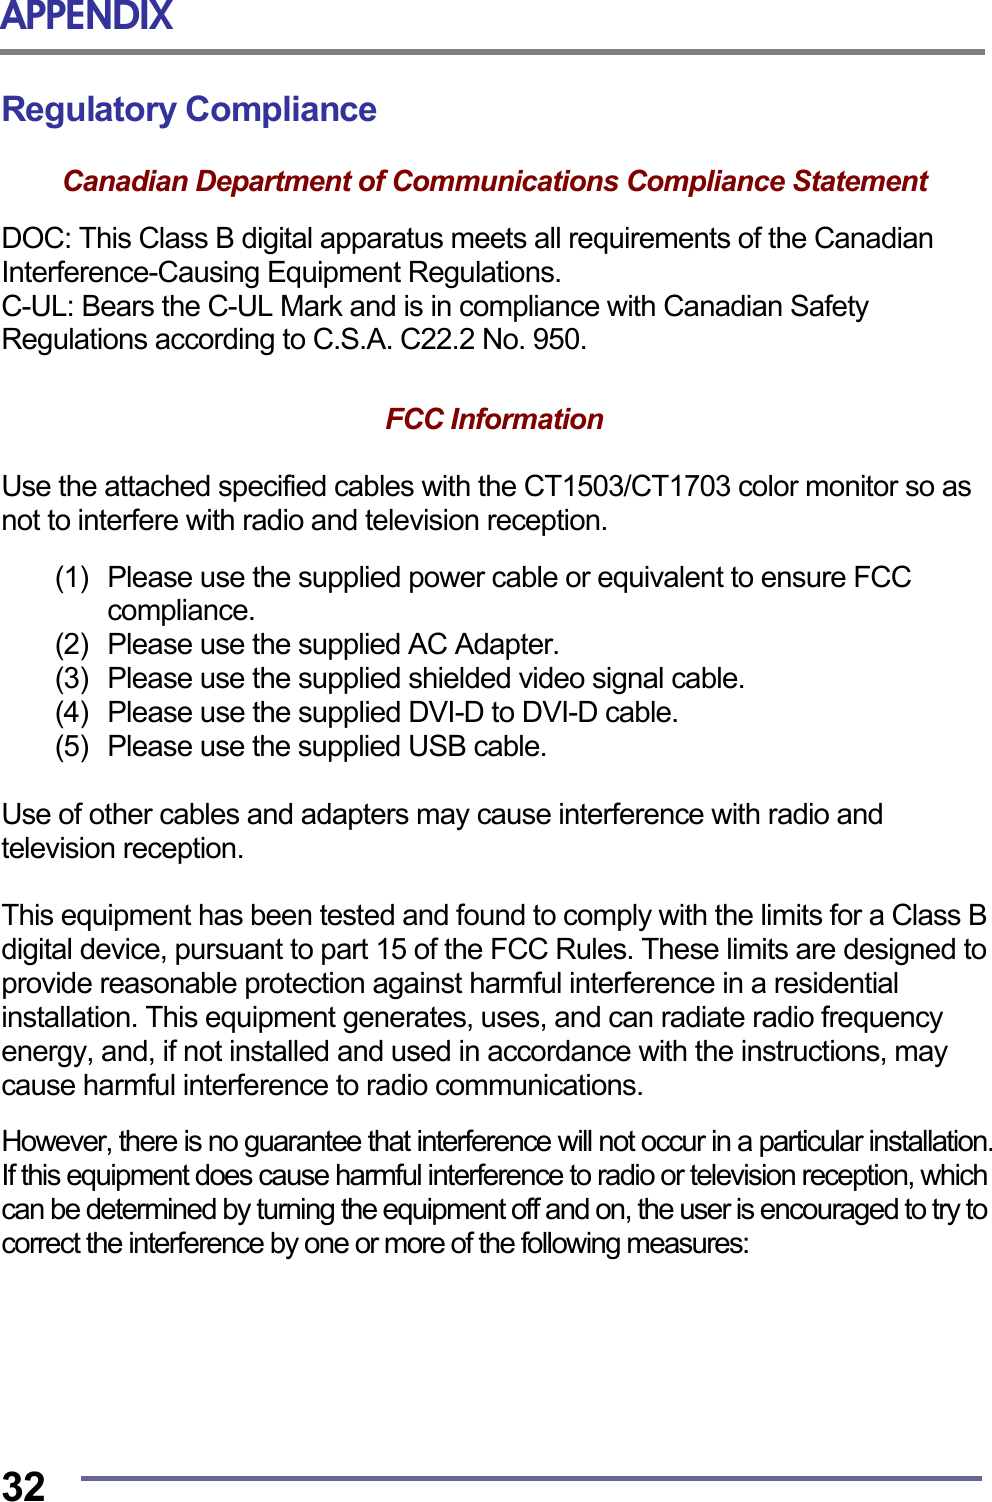 APPENDIX  32 Regulatory Compliance  Canadian Department of Communications Compliance Statement  DOC: This Class B digital apparatus meets all requirements of the Canadian Interference-Causing Equipment Regulations. C-UL: Bears the C-UL Mark and is in compliance with Canadian Safety Regulations according to C.S.A. C22.2 No. 950.   FCC Information   Use the attached specified cables with the CT1503/CT1703 color monitor so as not to interfere with radio and television reception.  (1)  Please use the supplied power cable or equivalent to ensure FCC compliance. (2)  Please use the supplied AC Adapter. (3)  Please use the supplied shielded video signal cable. (4)   Please use the supplied DVI-D to DVI-D cable. (5)   Please use the supplied USB cable.  Use of other cables and adapters may cause interference with radio and television reception.  This equipment has been tested and found to comply with the limits for a Class B digital device, pursuant to part 15 of the FCC Rules. These limits are designed to provide reasonable protection against harmful interference in a residential installation. This equipment generates, uses, and can radiate radio frequency energy, and, if not installed and used in accordance with the instructions, may cause harmful interference to radio communications.  However, there is no guarantee that interference will not occur in a particular installation. If this equipment does cause harmful interference to radio or television reception, which can be determined by turning the equipment off and on, the user is encouraged to try to correct the interference by one or more of the following measures:  